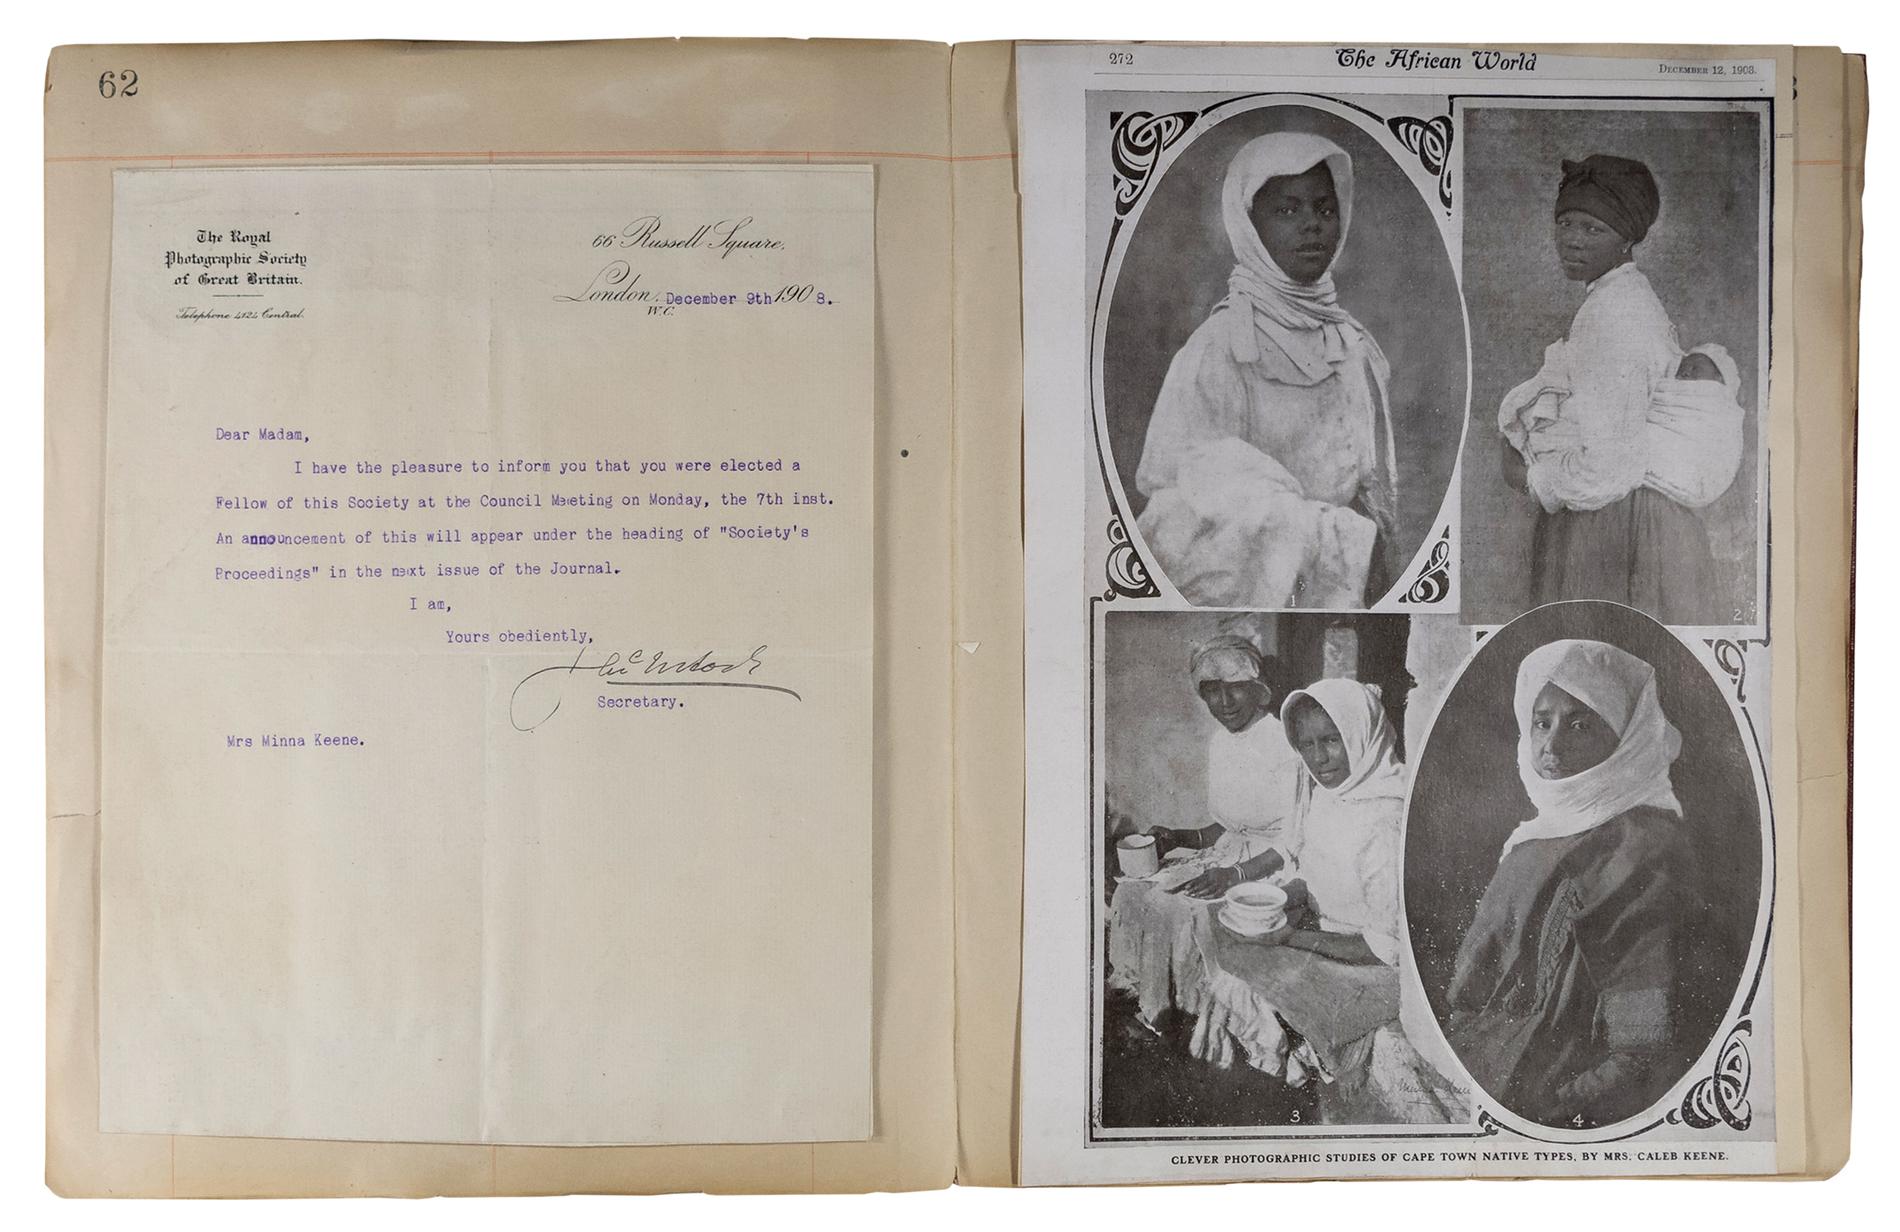 A bound scrapbook spread featuring a page with a typewritten letter from the Photographic Society of Great Britain and a page featuring four studio portraits titled “The African World.”